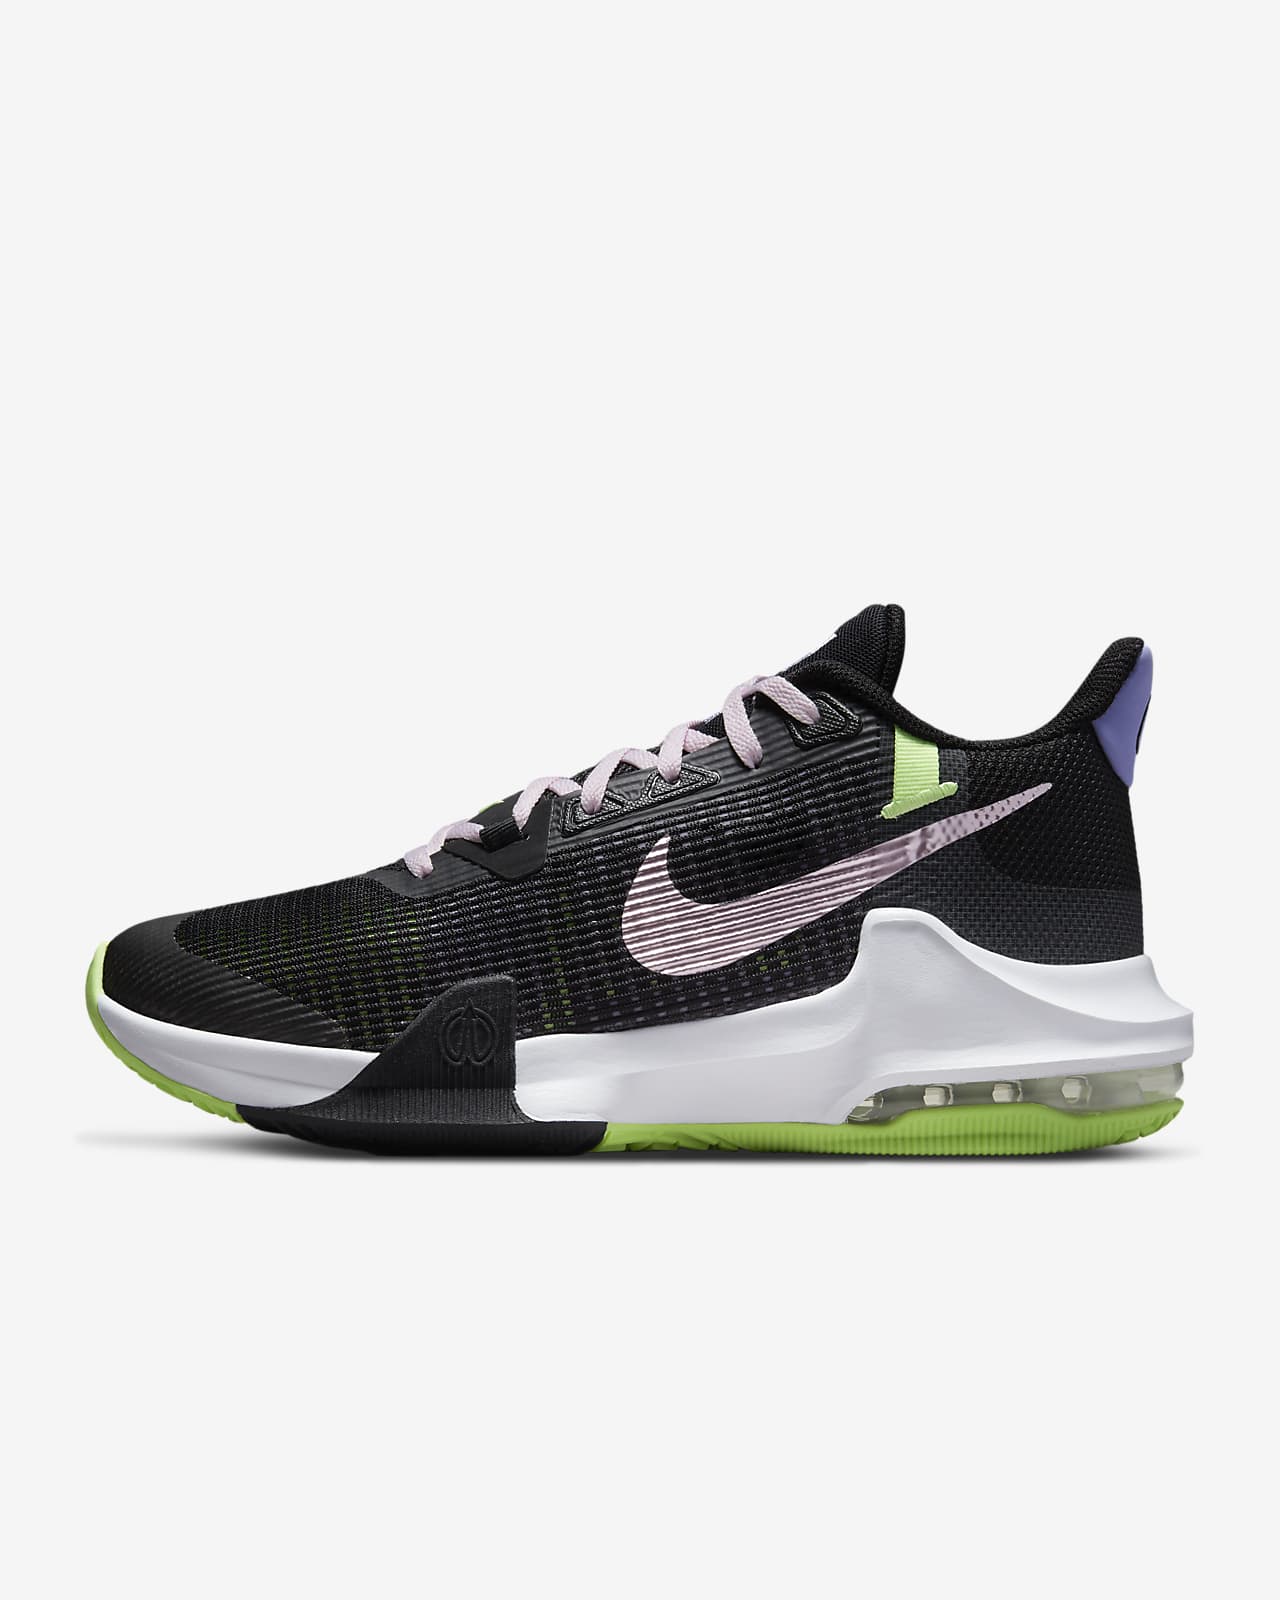 Padre Actor Exitoso Nike Air Max Impact 3 Basketball Shoe. Nike CH